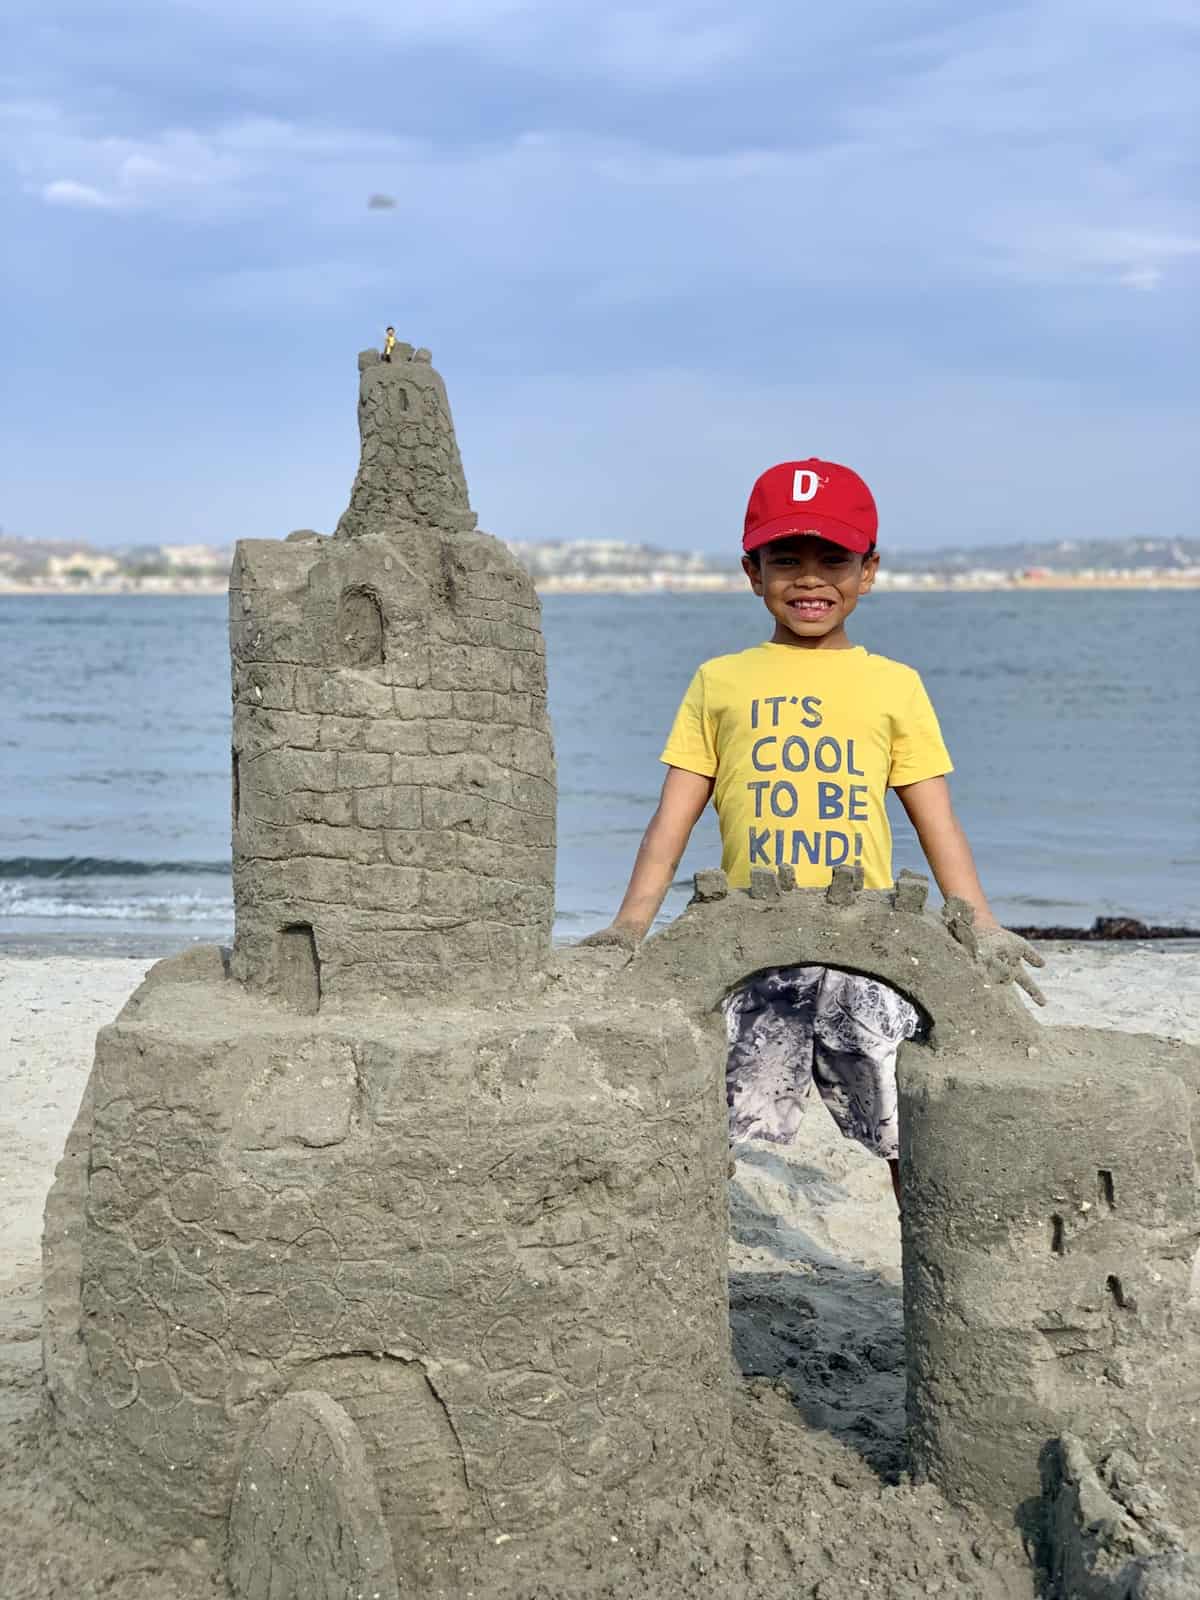 Sandcastle building with kids